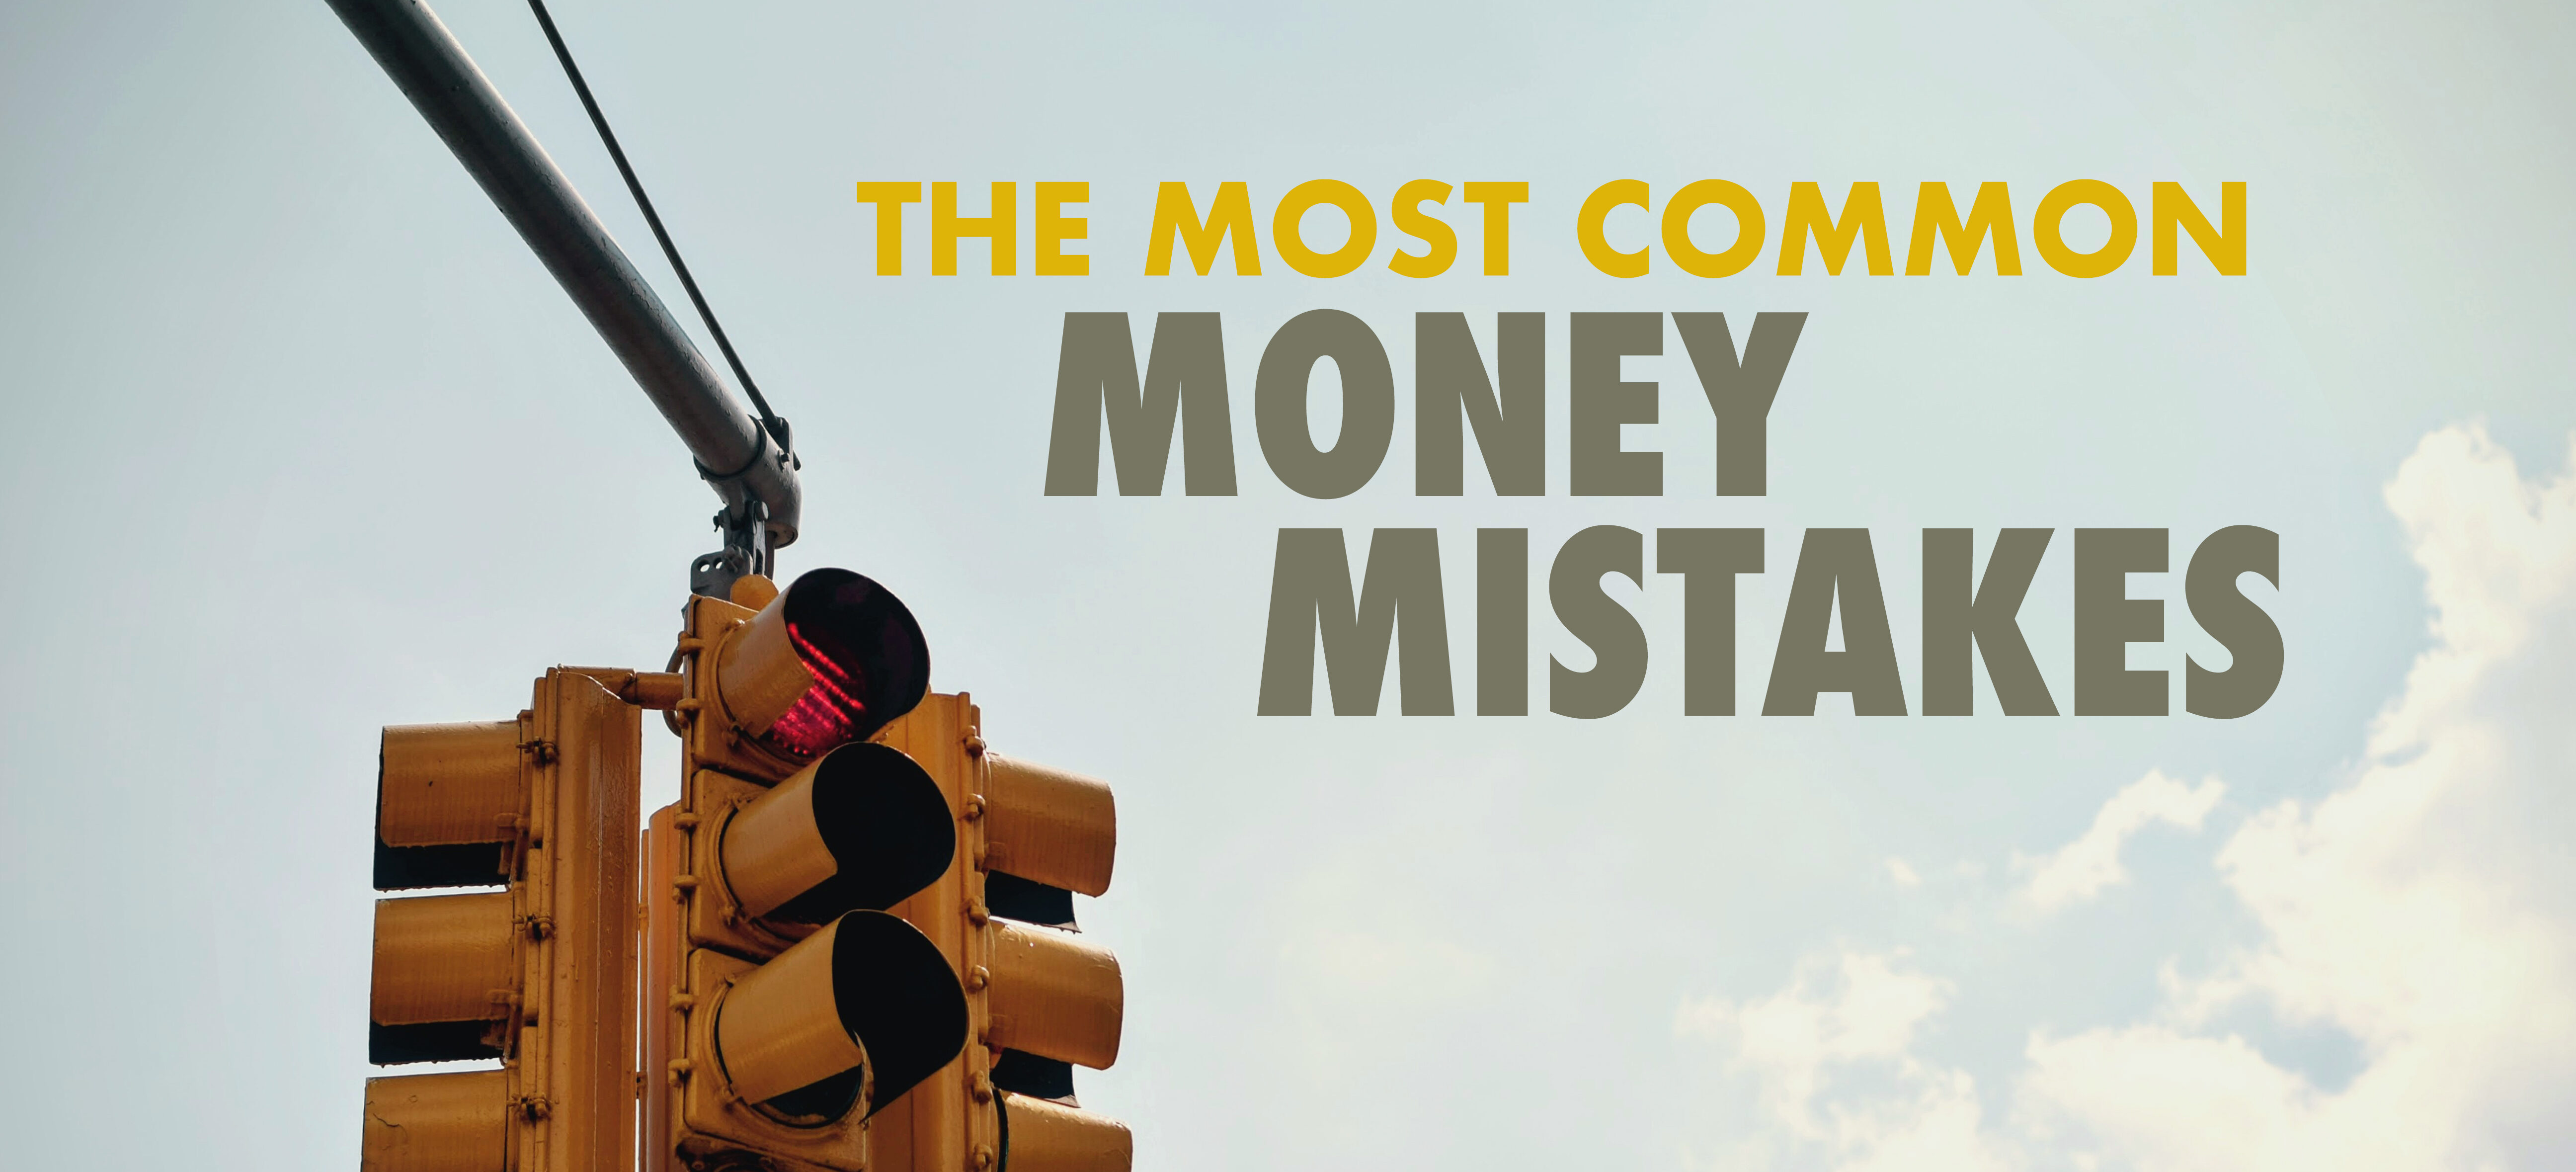 The three most common money mistakes